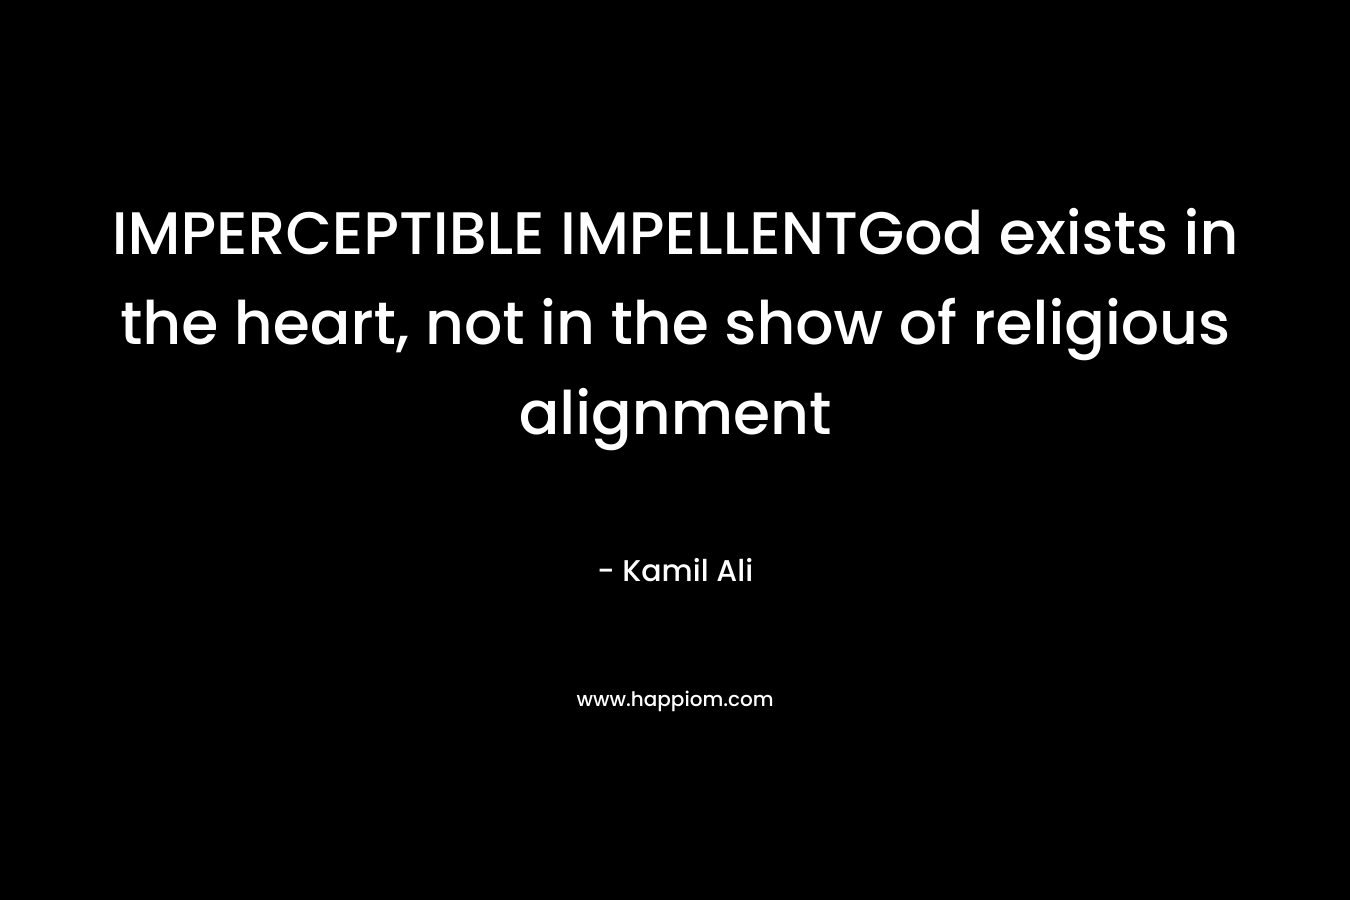 IMPERCEPTIBLE IMPELLENTGod exists in the heart, not in the show of religious alignment